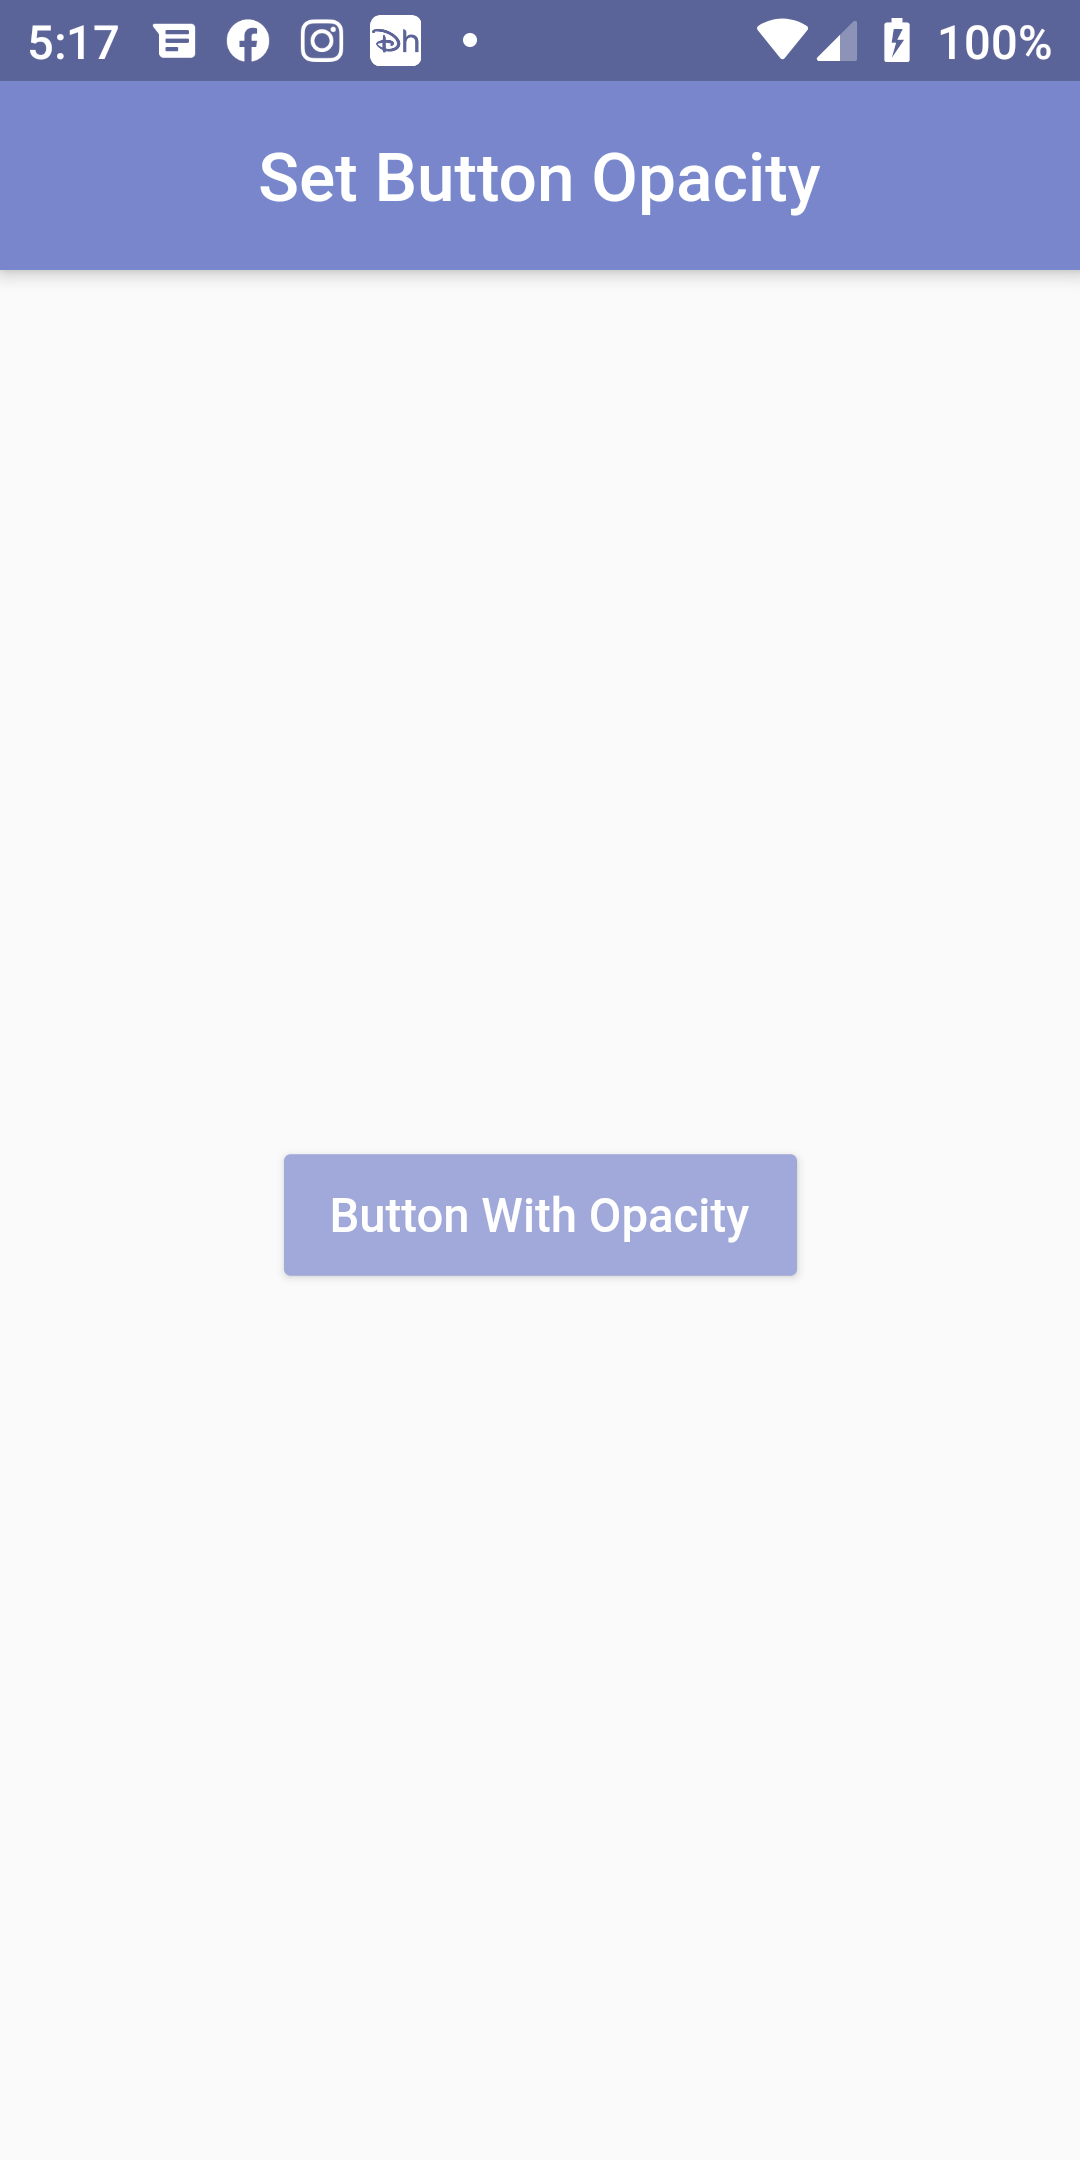 How To Set Button Opacity Using Flutter Android App